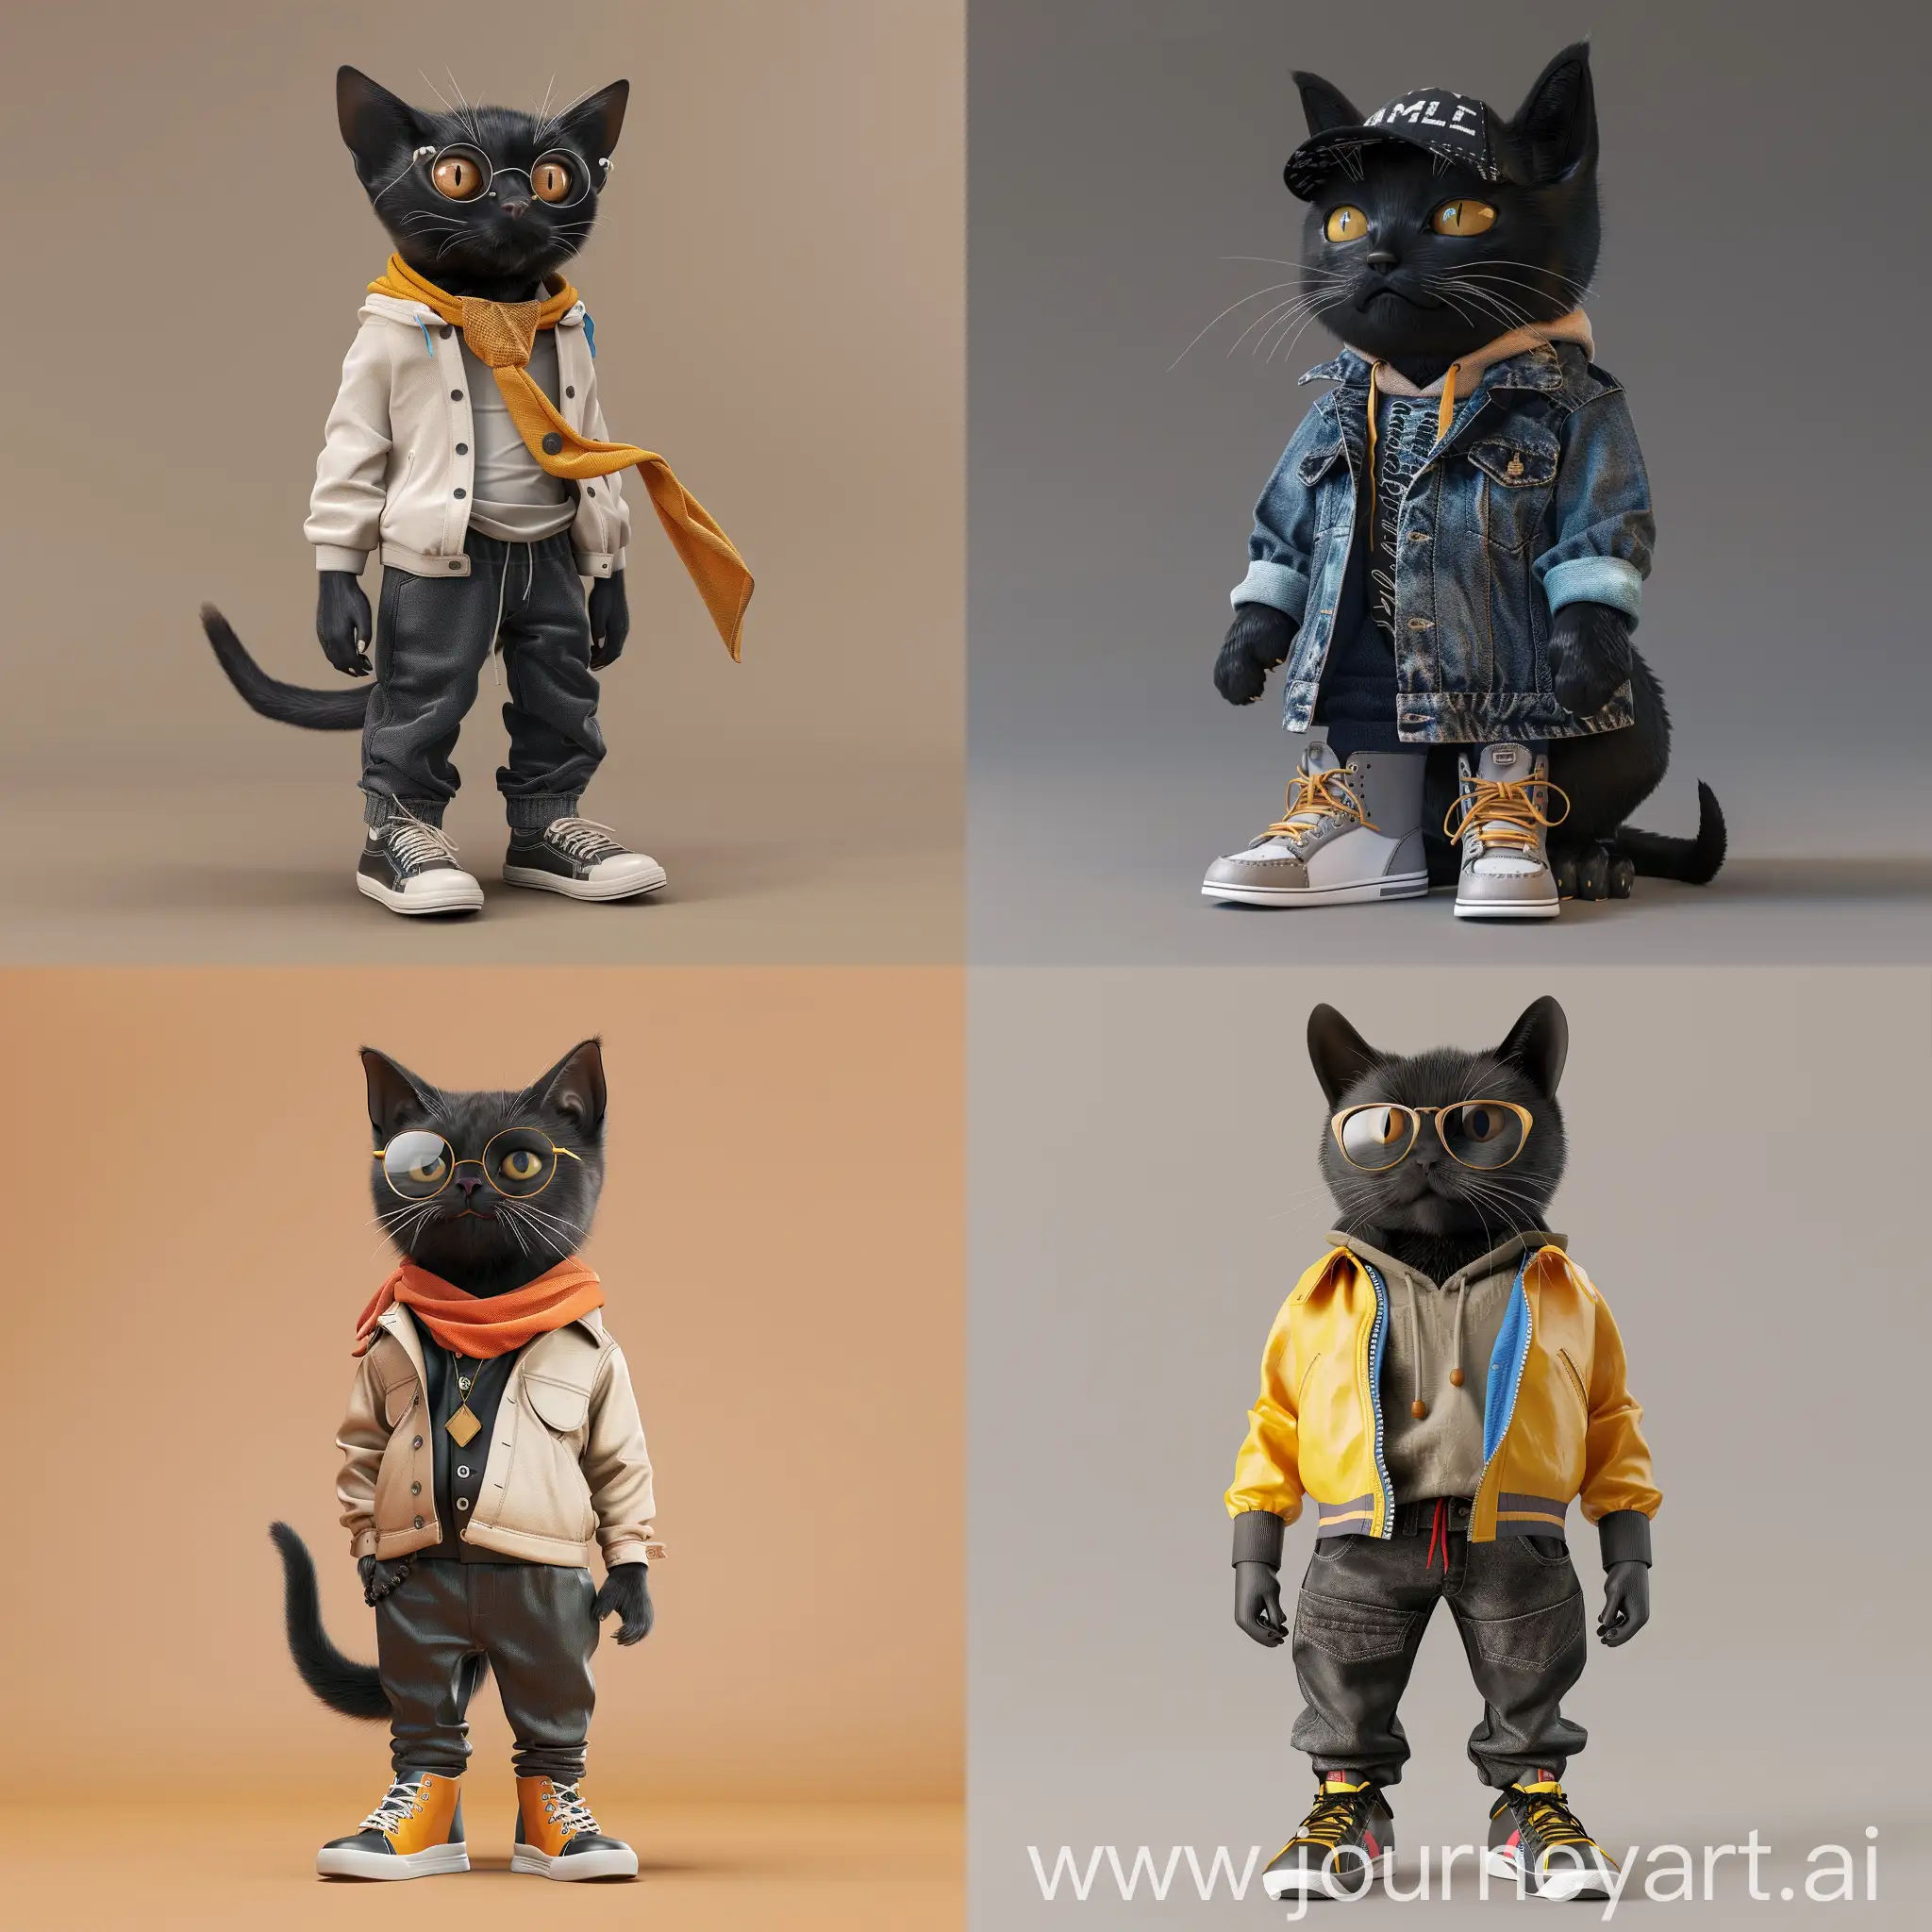 Stylish-3D-Render-of-a-Black-Cat-in-Modern-Fashion